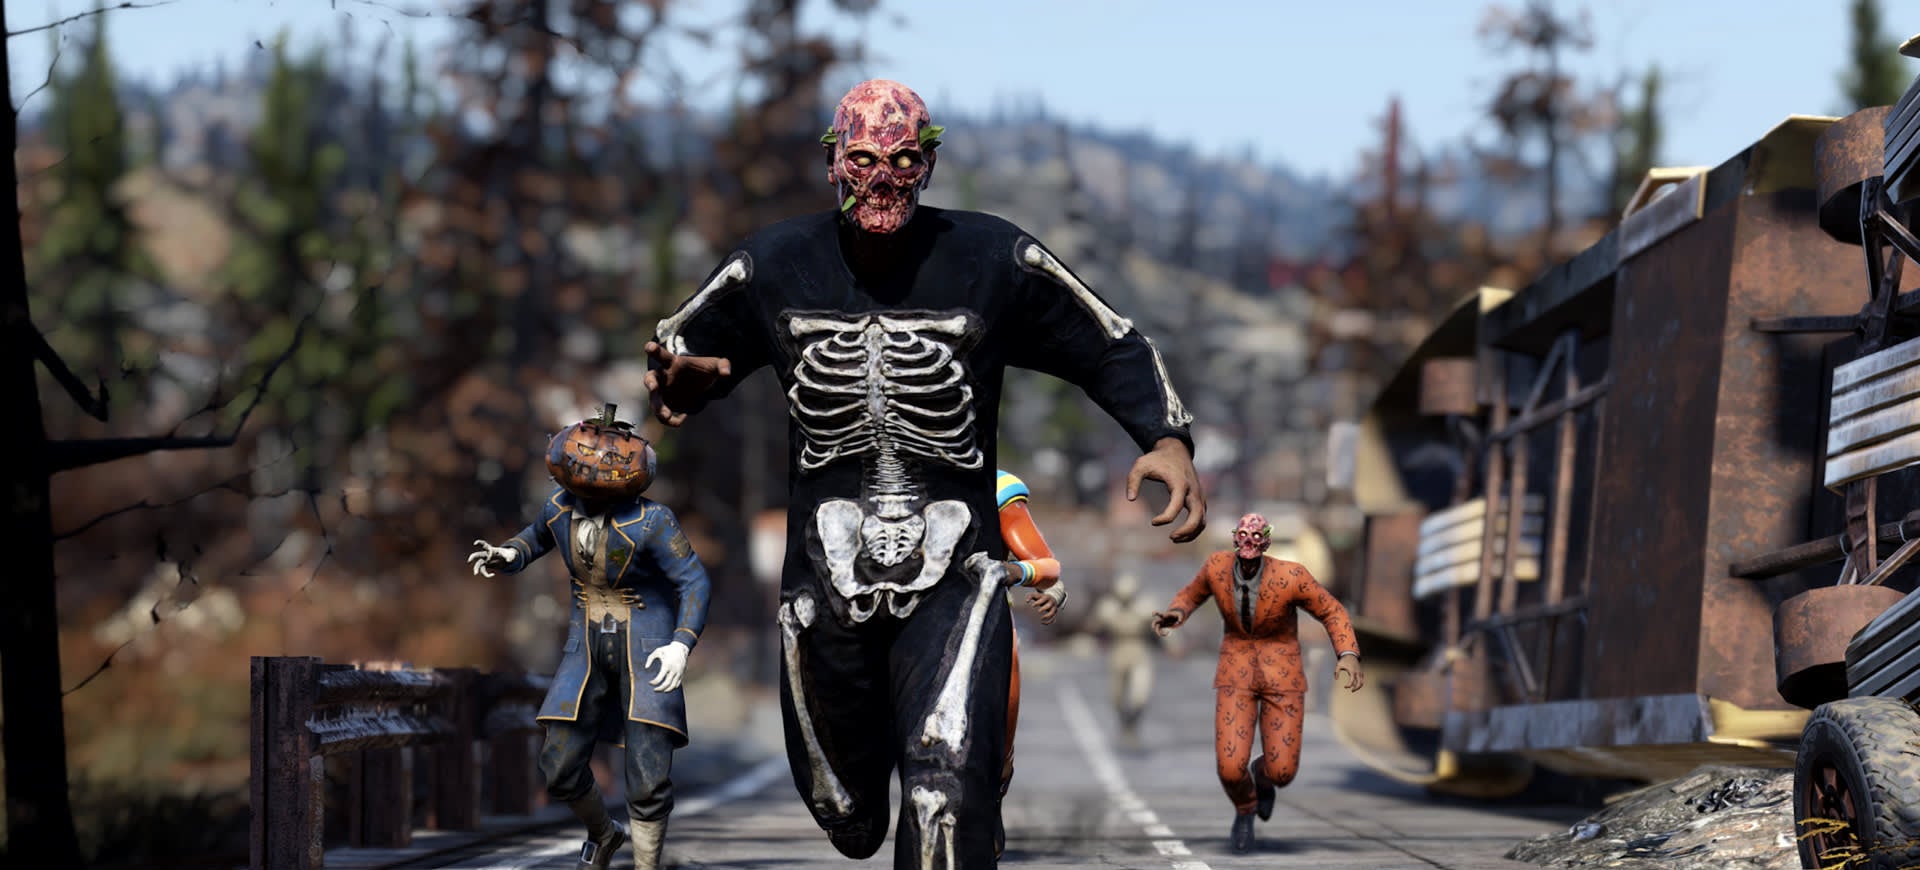 Image for Fallout 76 is free to play now through October 25